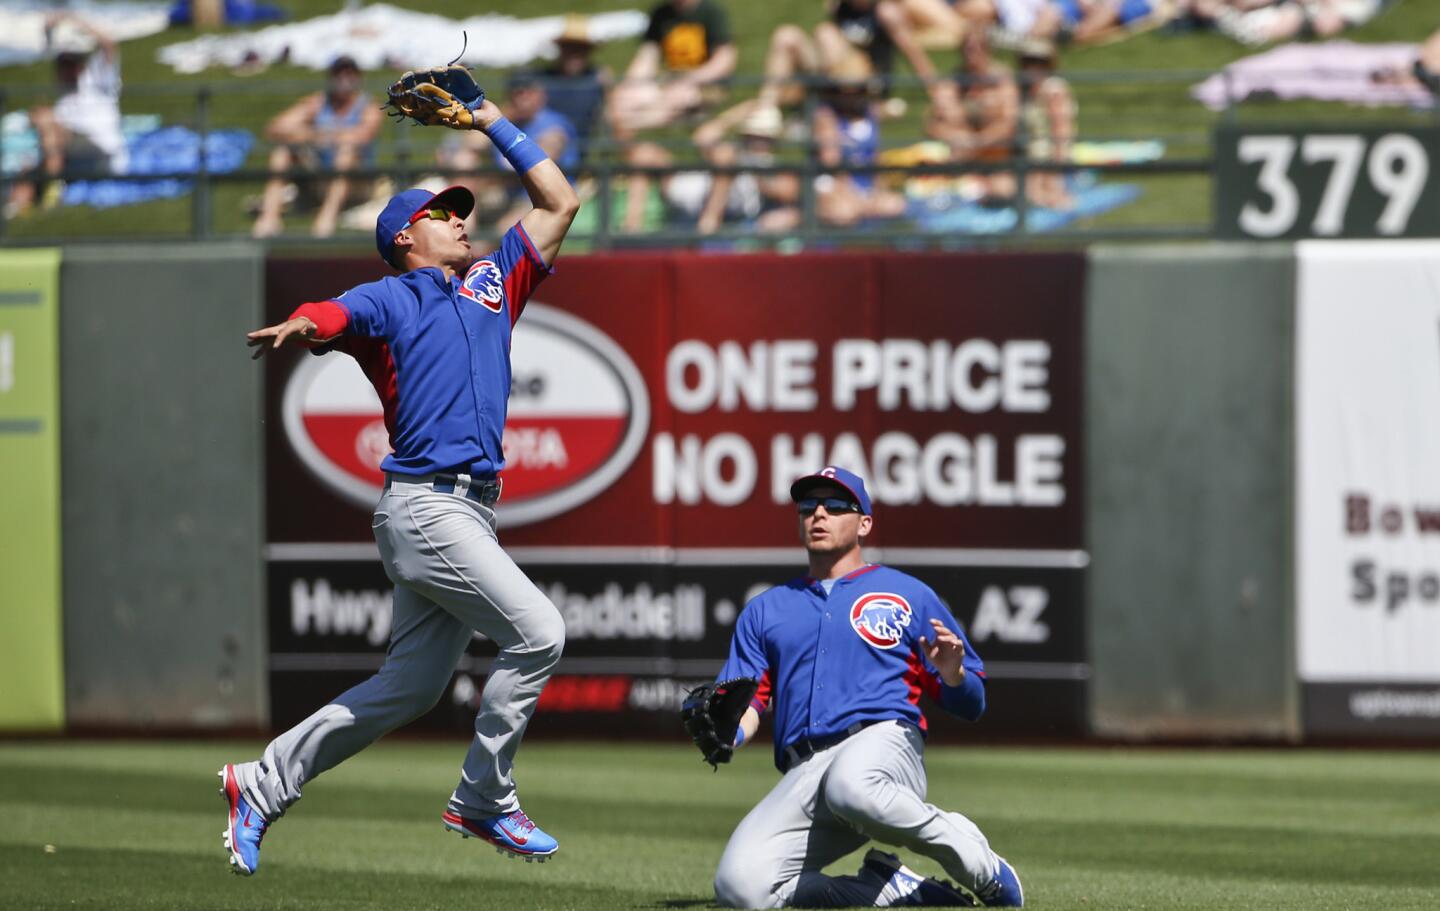 Second baseman Javier Baez makes a running catch as right fielder Ryan Sweeney ducks to avoid a collision during the second inning.